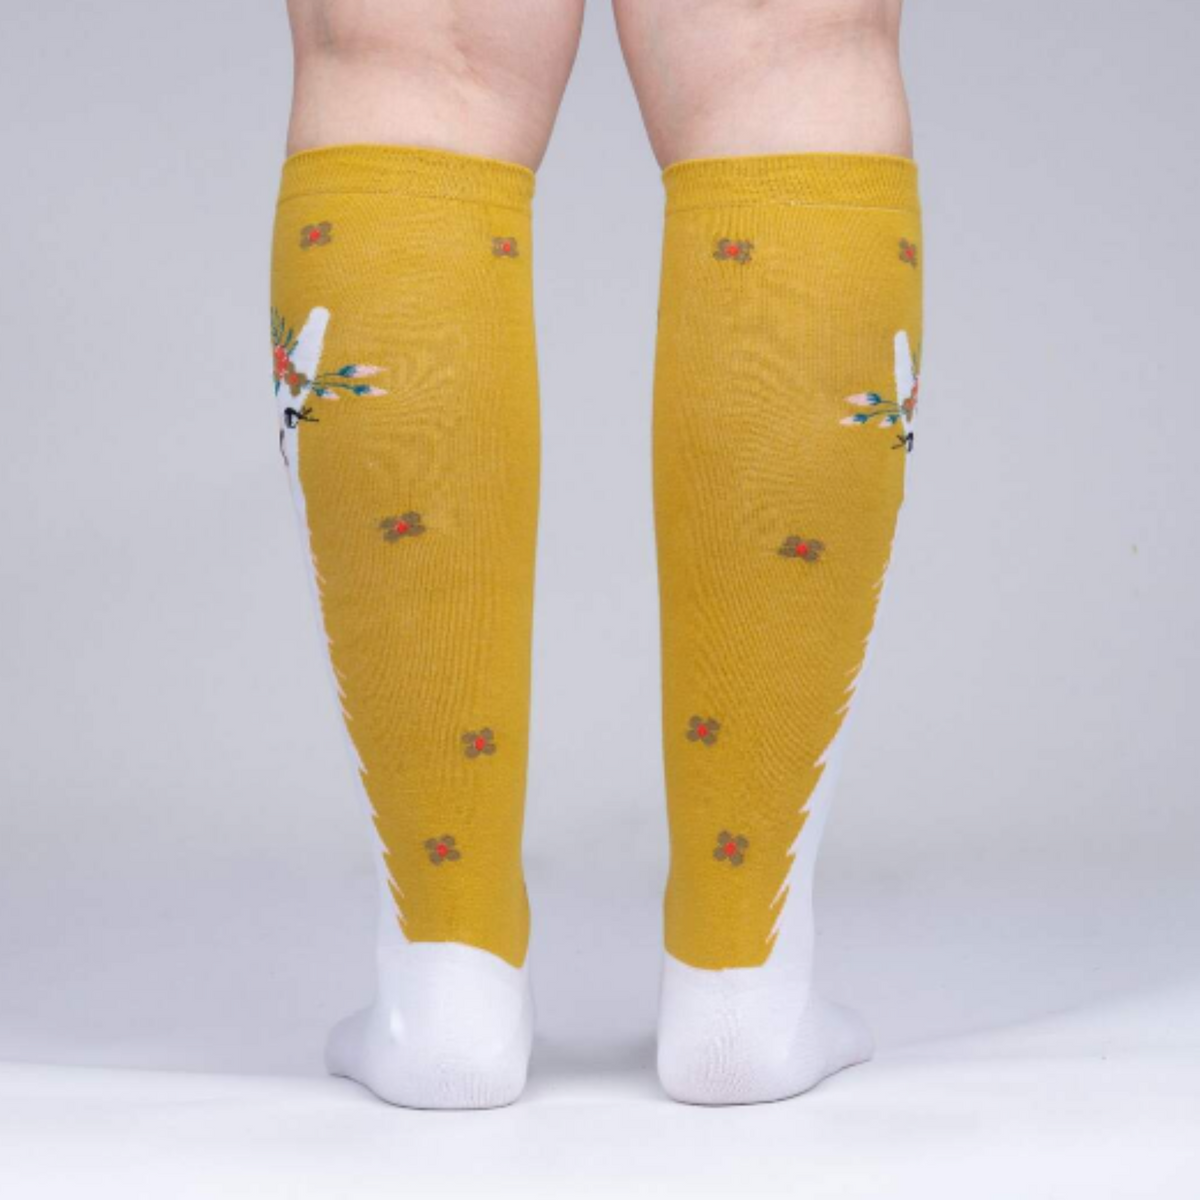 Sock It To Me Llama Queen women&#39;s sock featuring goldenrod knee high sock with white llama wearing a floral crown worn by model seen from behind. .